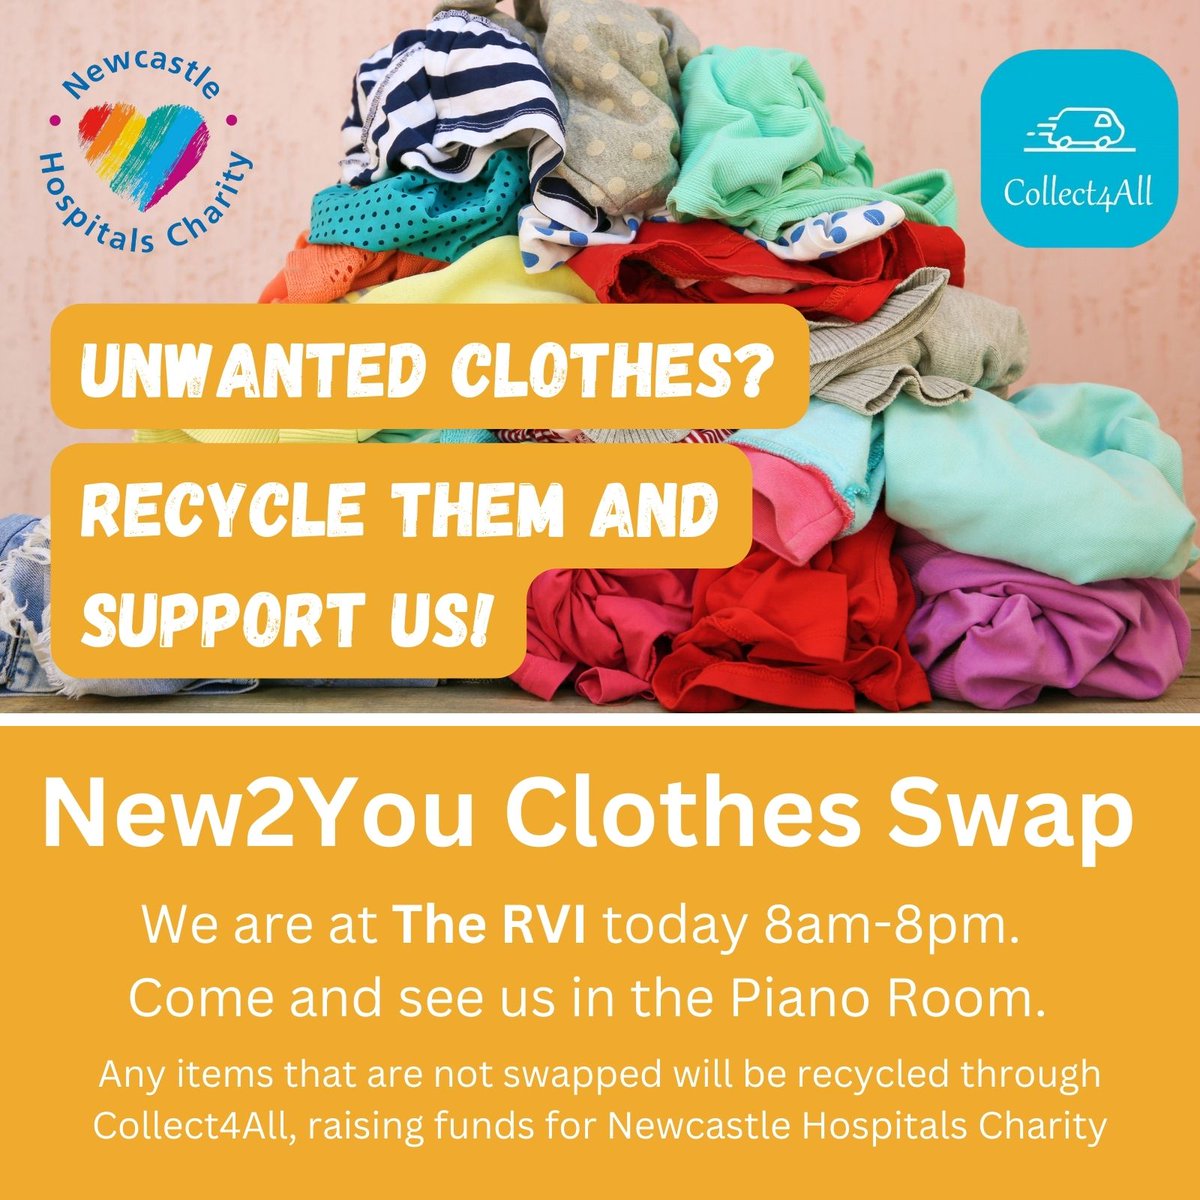 📢Calling @Newcastle_NHS staff - The New2You clothes swap is on today at The RVI, 8am-8pm. Pop along and swap your unwanted clothing and support Newcastle Hospitals Charity. See staff intranet for more details. @SustainableNUTH #SHINE